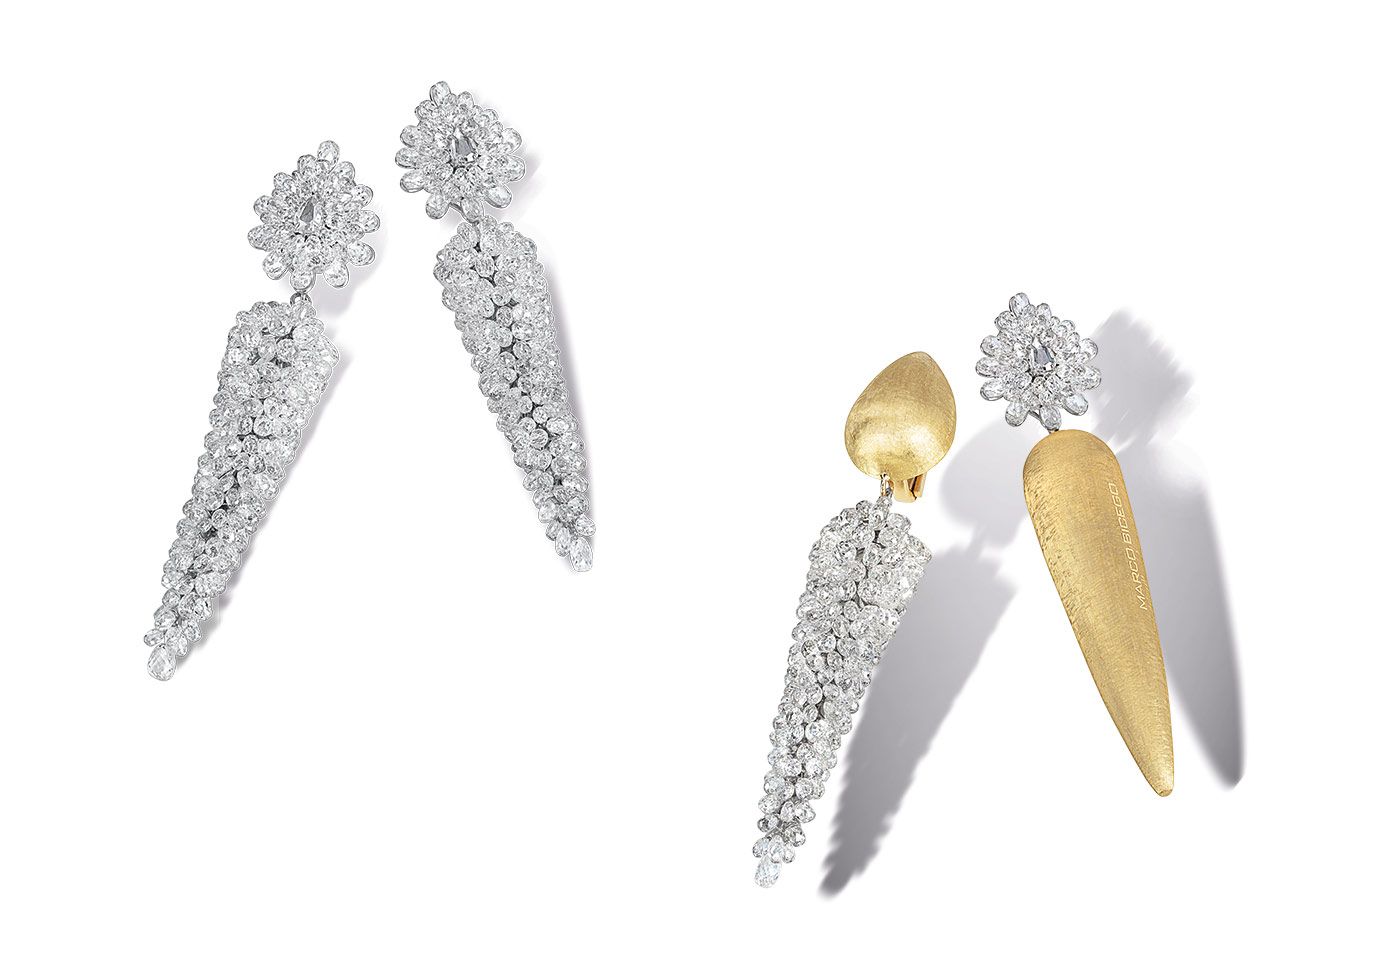 Marco Bicego diamond briolette earrings from the new ALTA high jewellery collection